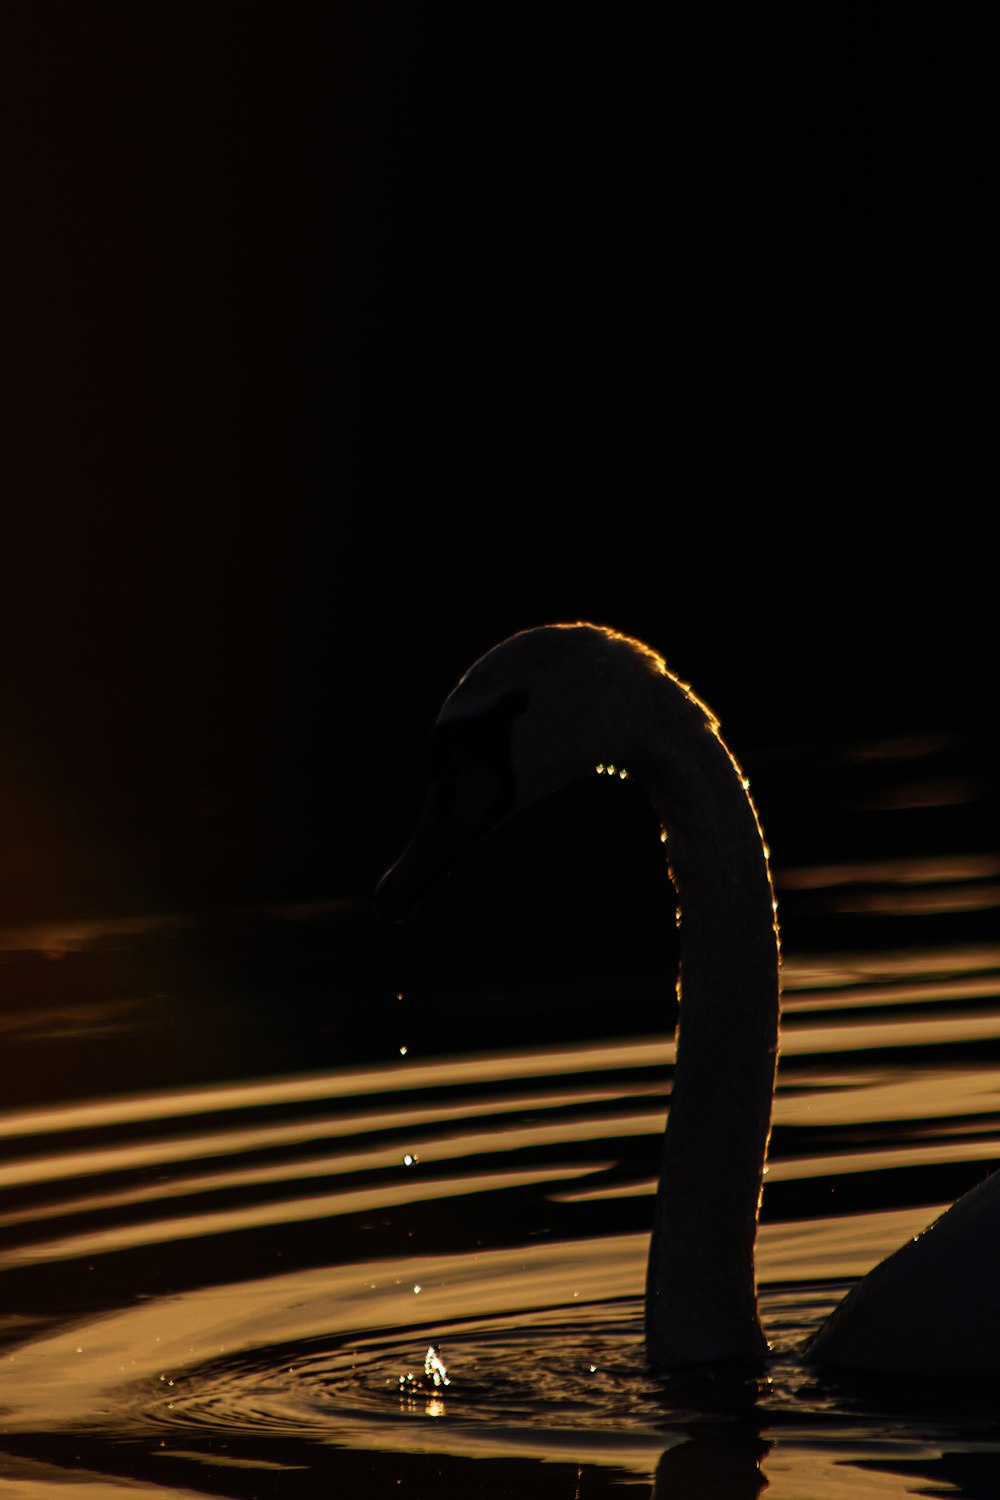 a swan is swimming in the water at night